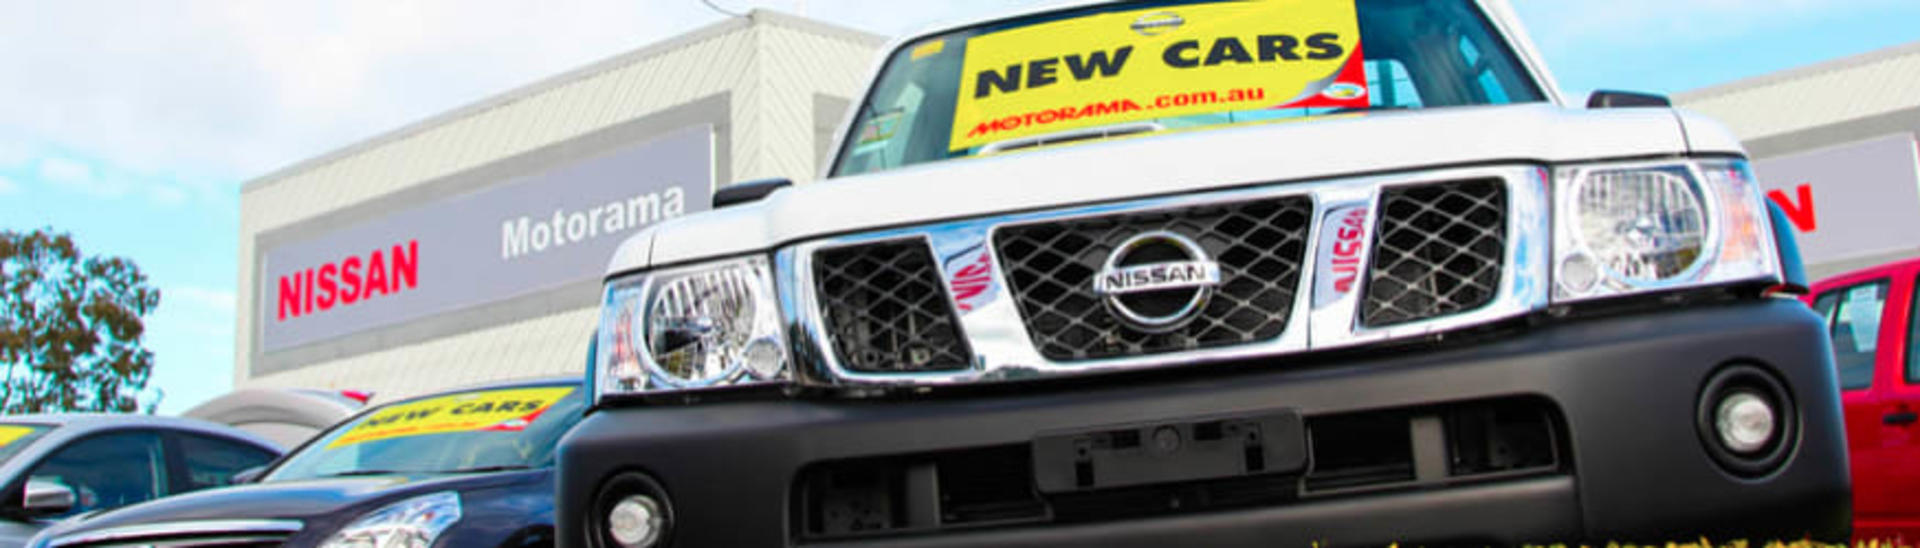 Say hello to Motorama Nissan in Browns Plains banner